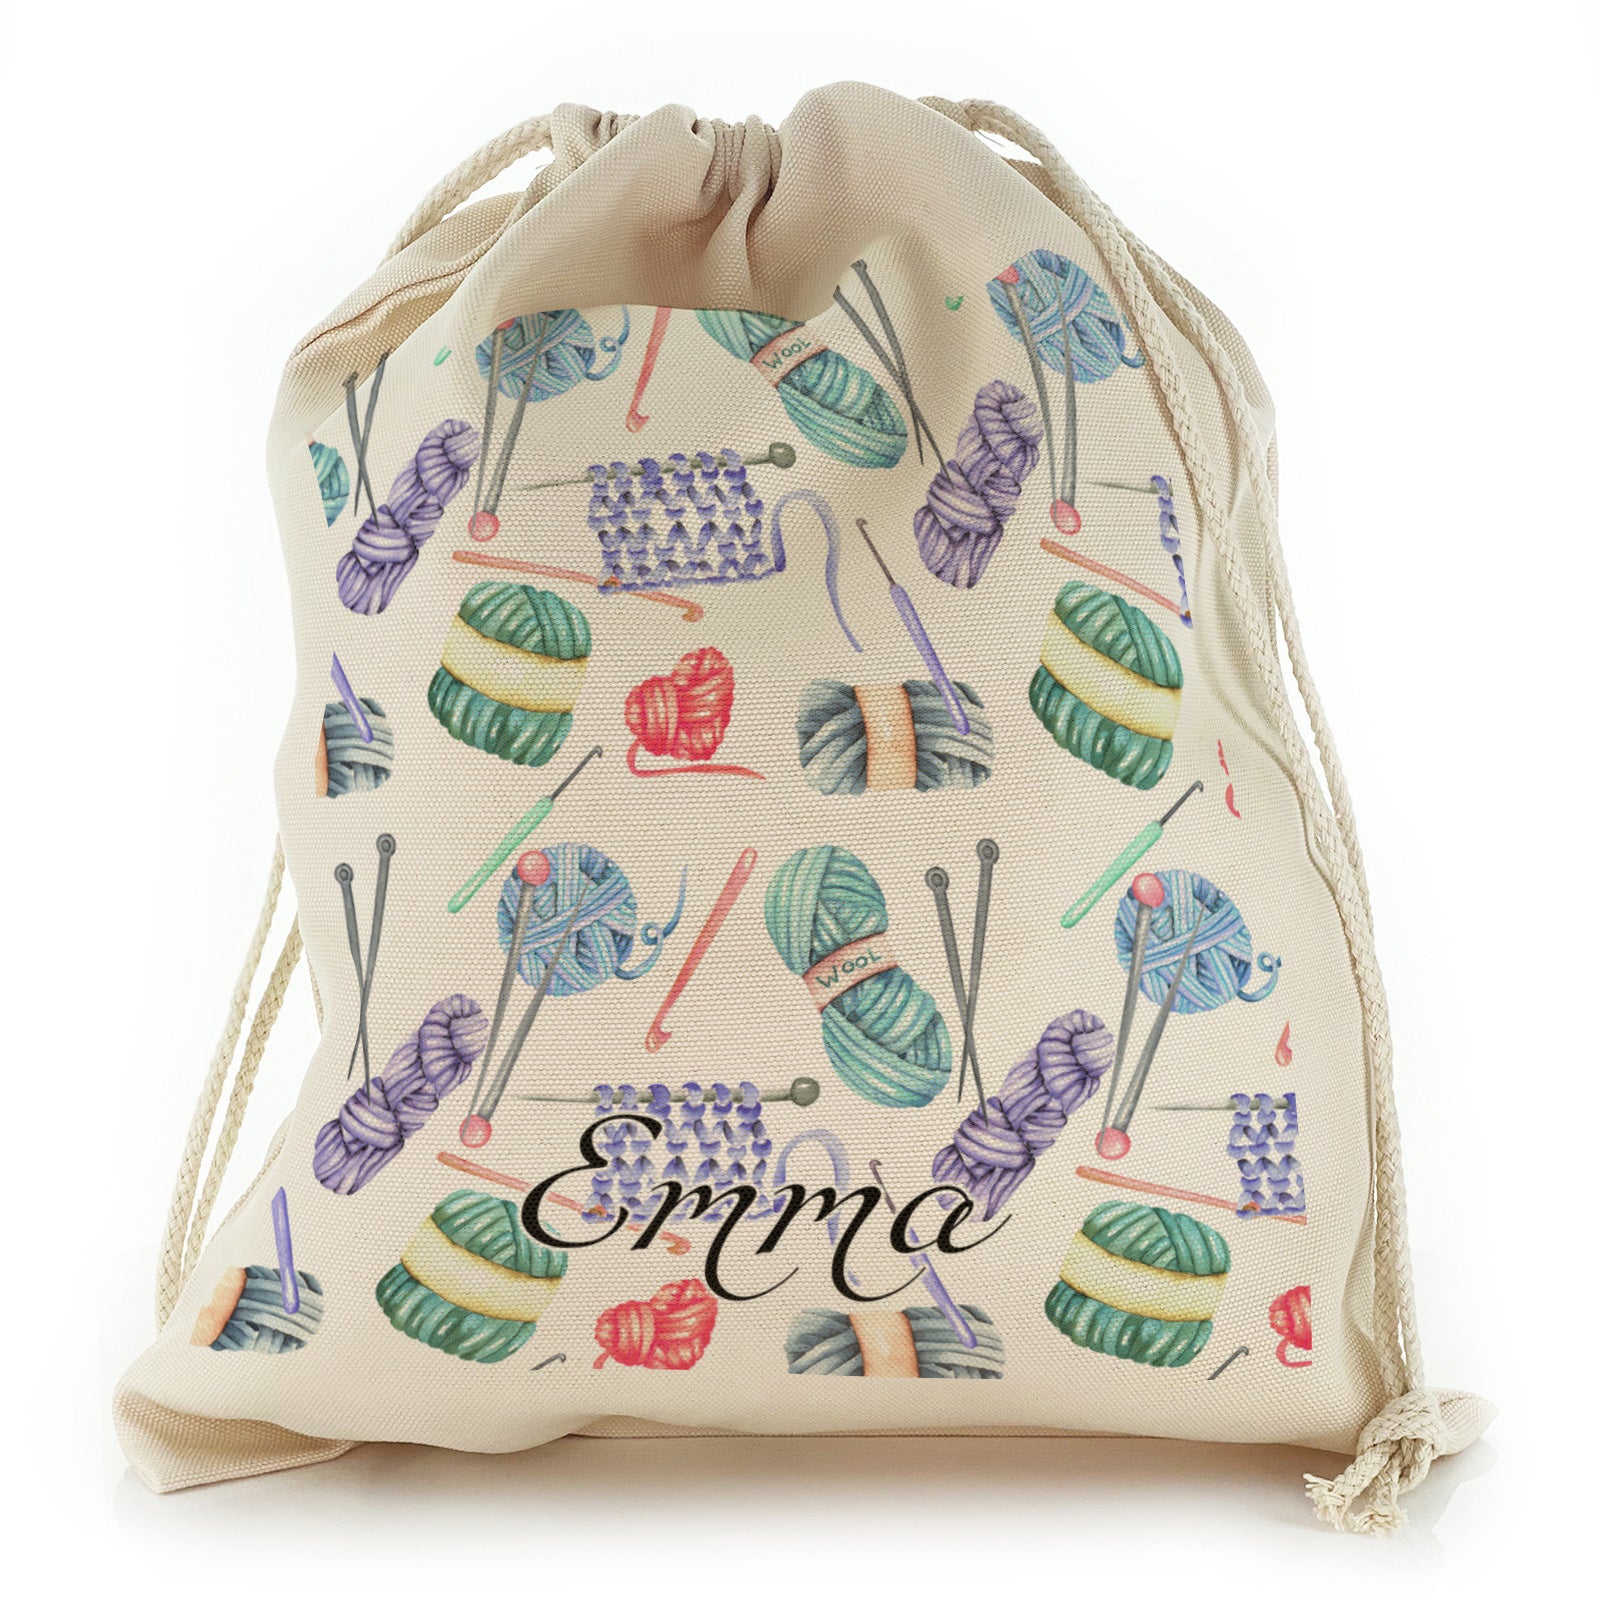 Personalised Canvas Sack with Stylish Text on Multicoloured Yarn and Needle Variants Pattern